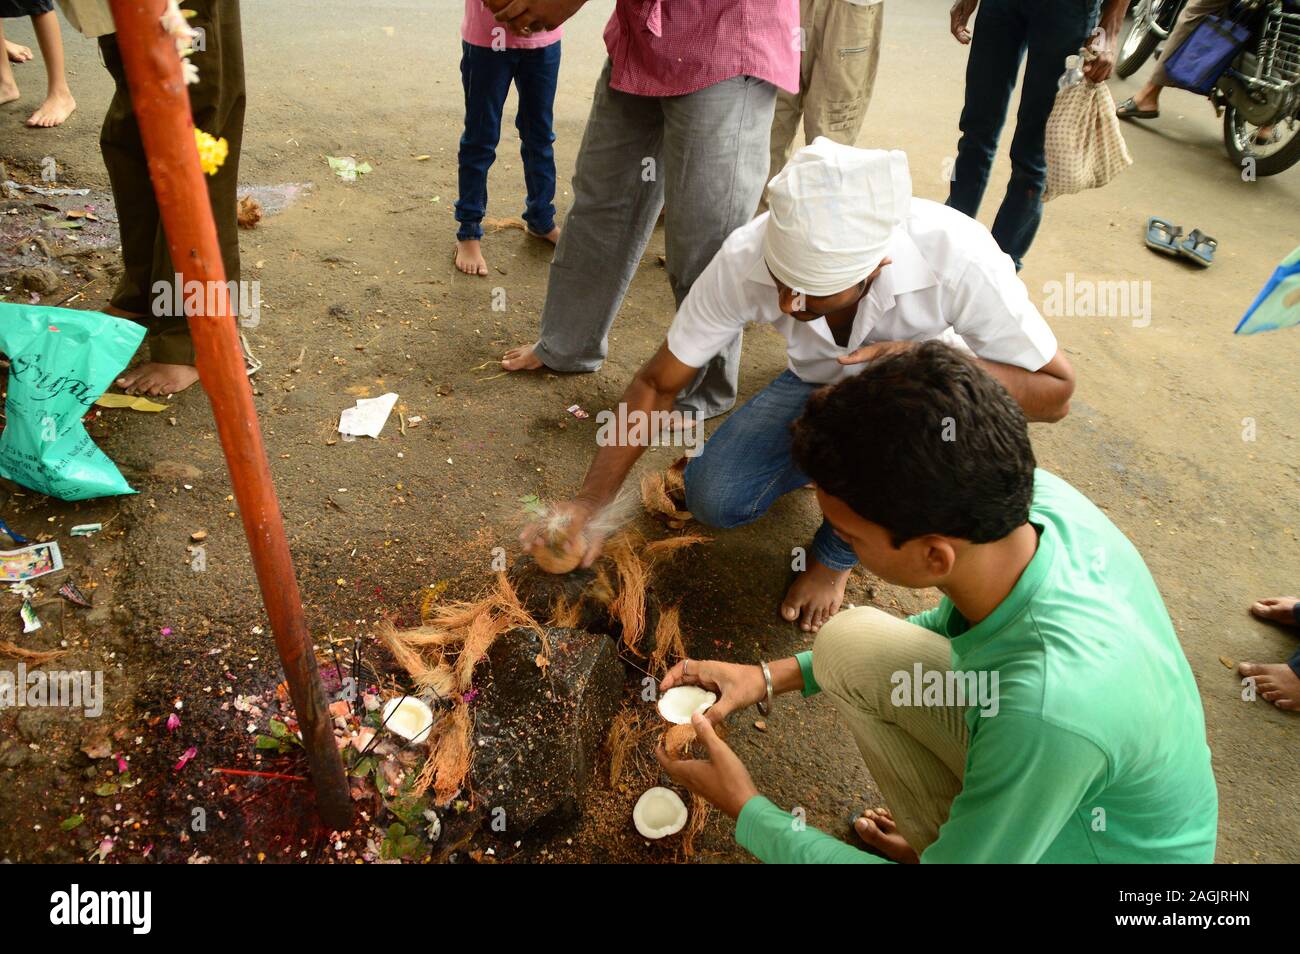 NAGPUR, MAHARASHTRA, INDIA - AUGUST 01 : People worship of Snake God in 'Nag Panchami' festival. It is traditional worship of snakes or serpents obser Stock Photo